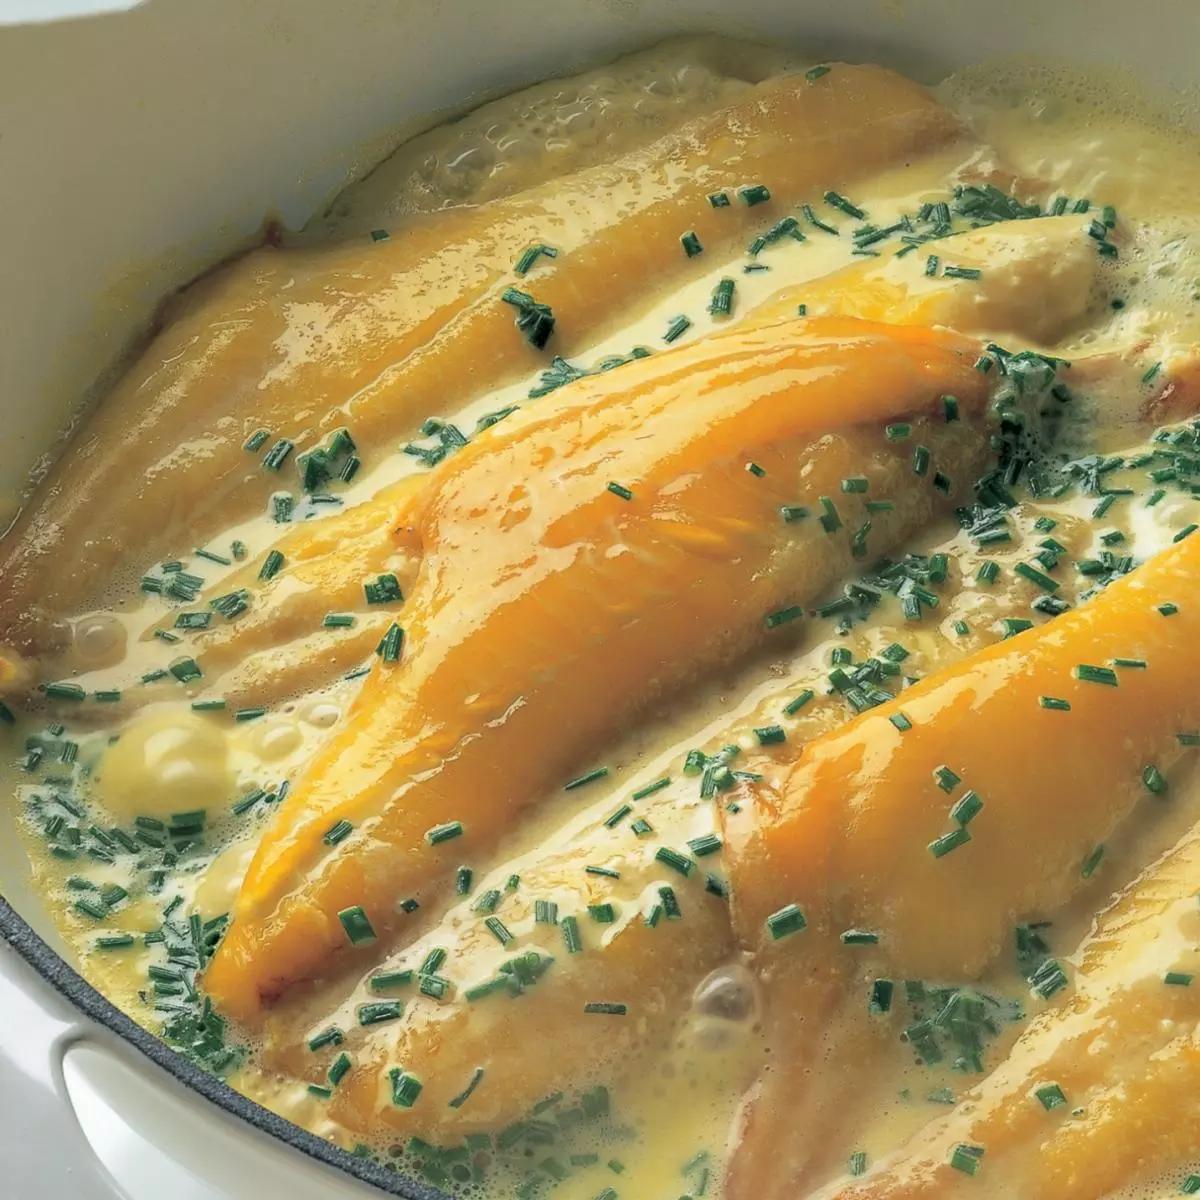 cooking smoked fish in milk - Why cook smoked haddock in milk